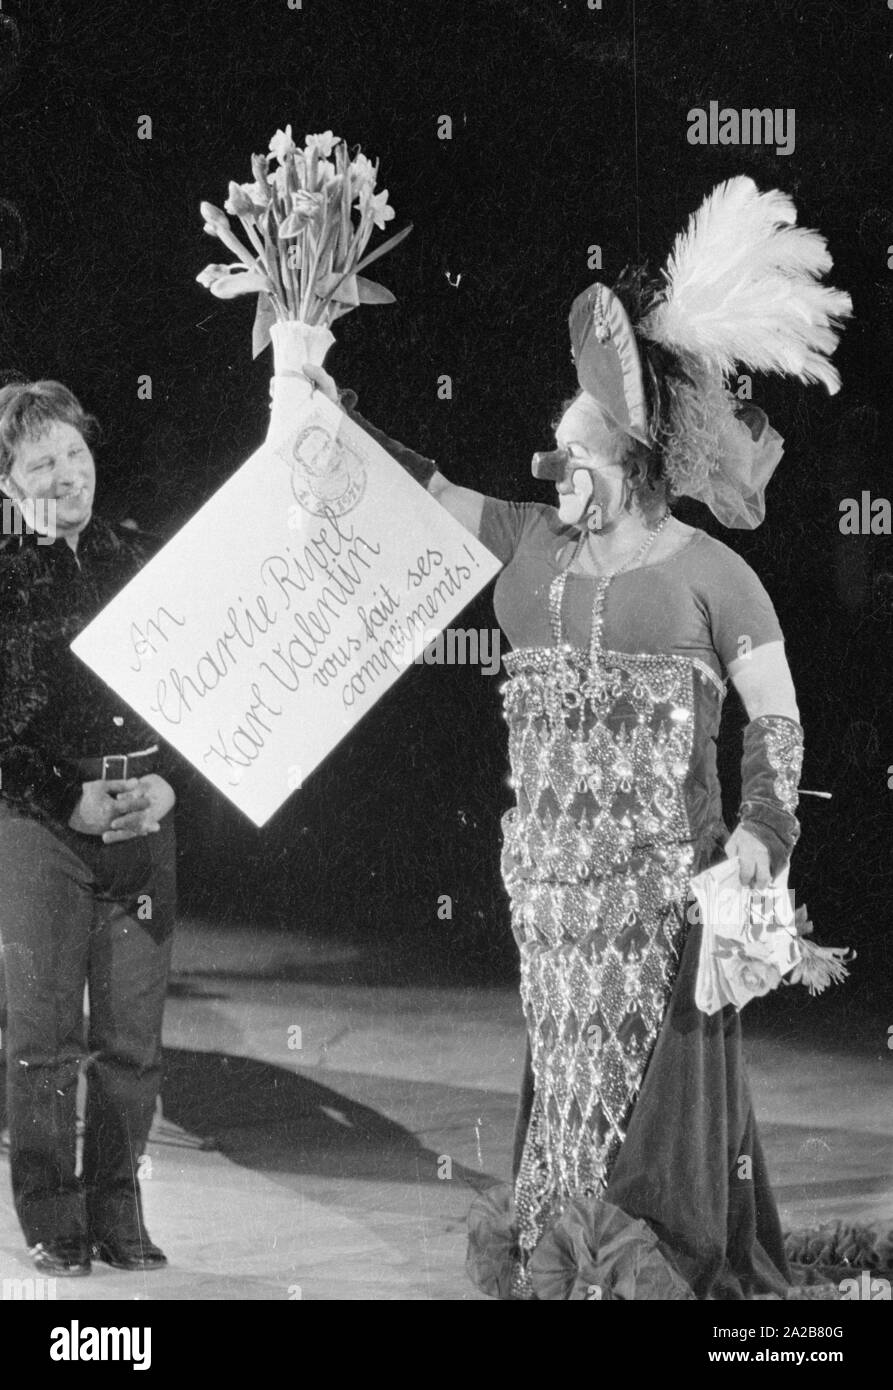 The Spanish clown Charlie Rivel during a performance in 1971. In his hand he holds a postcard with a compliment to Karl Valentin (already deceased at the time) and a bouquet of flowers. Stock Photo